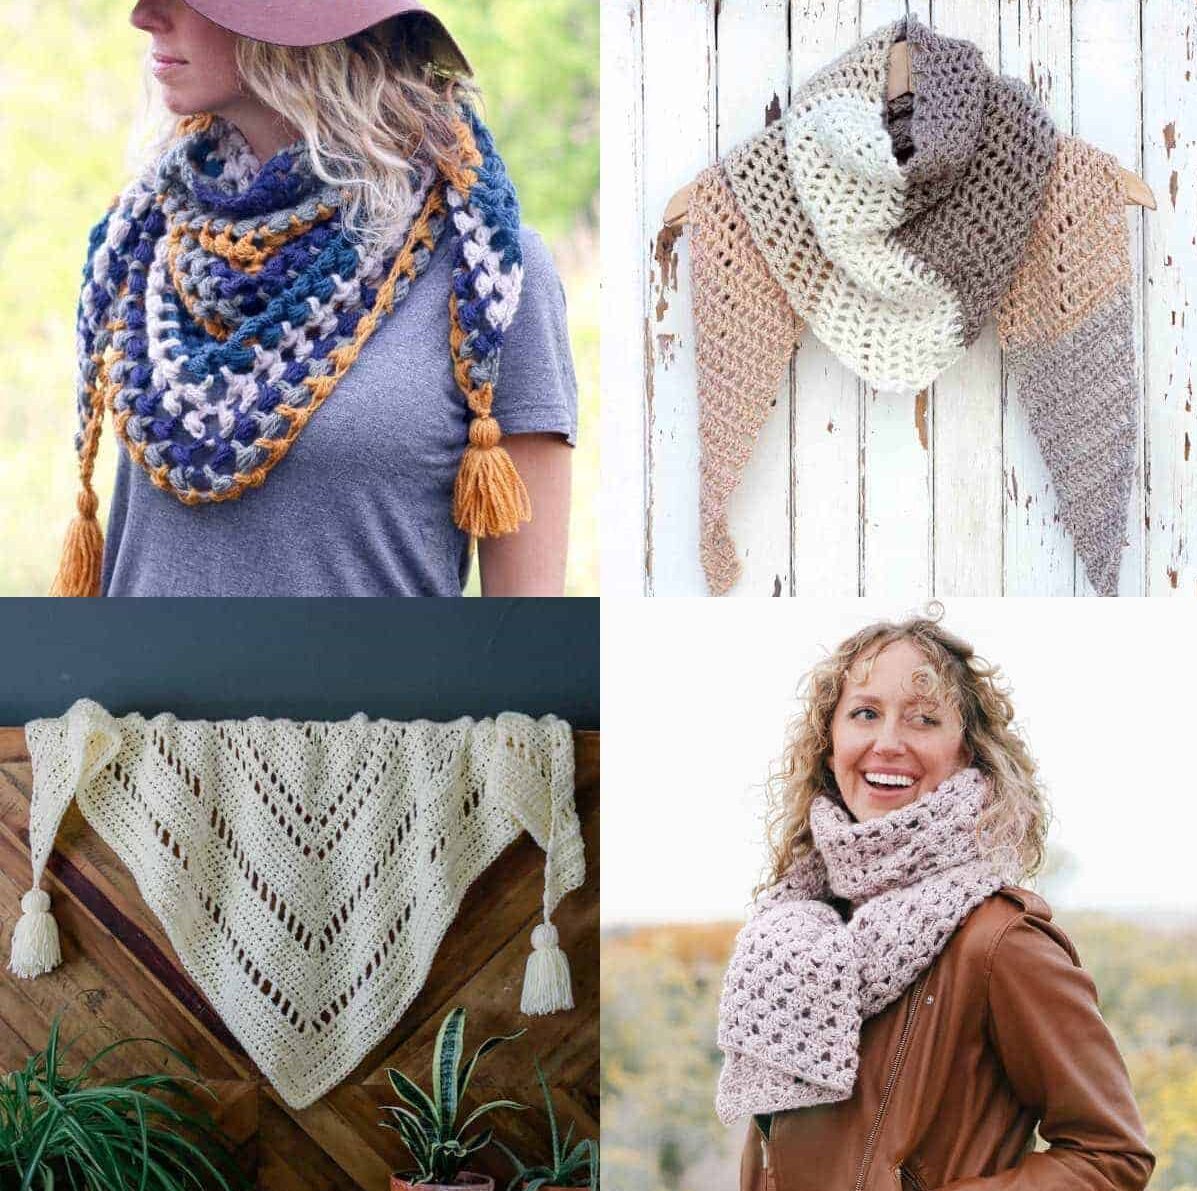 32 Easy, Free Crochet Shawl and Wrap Patterns